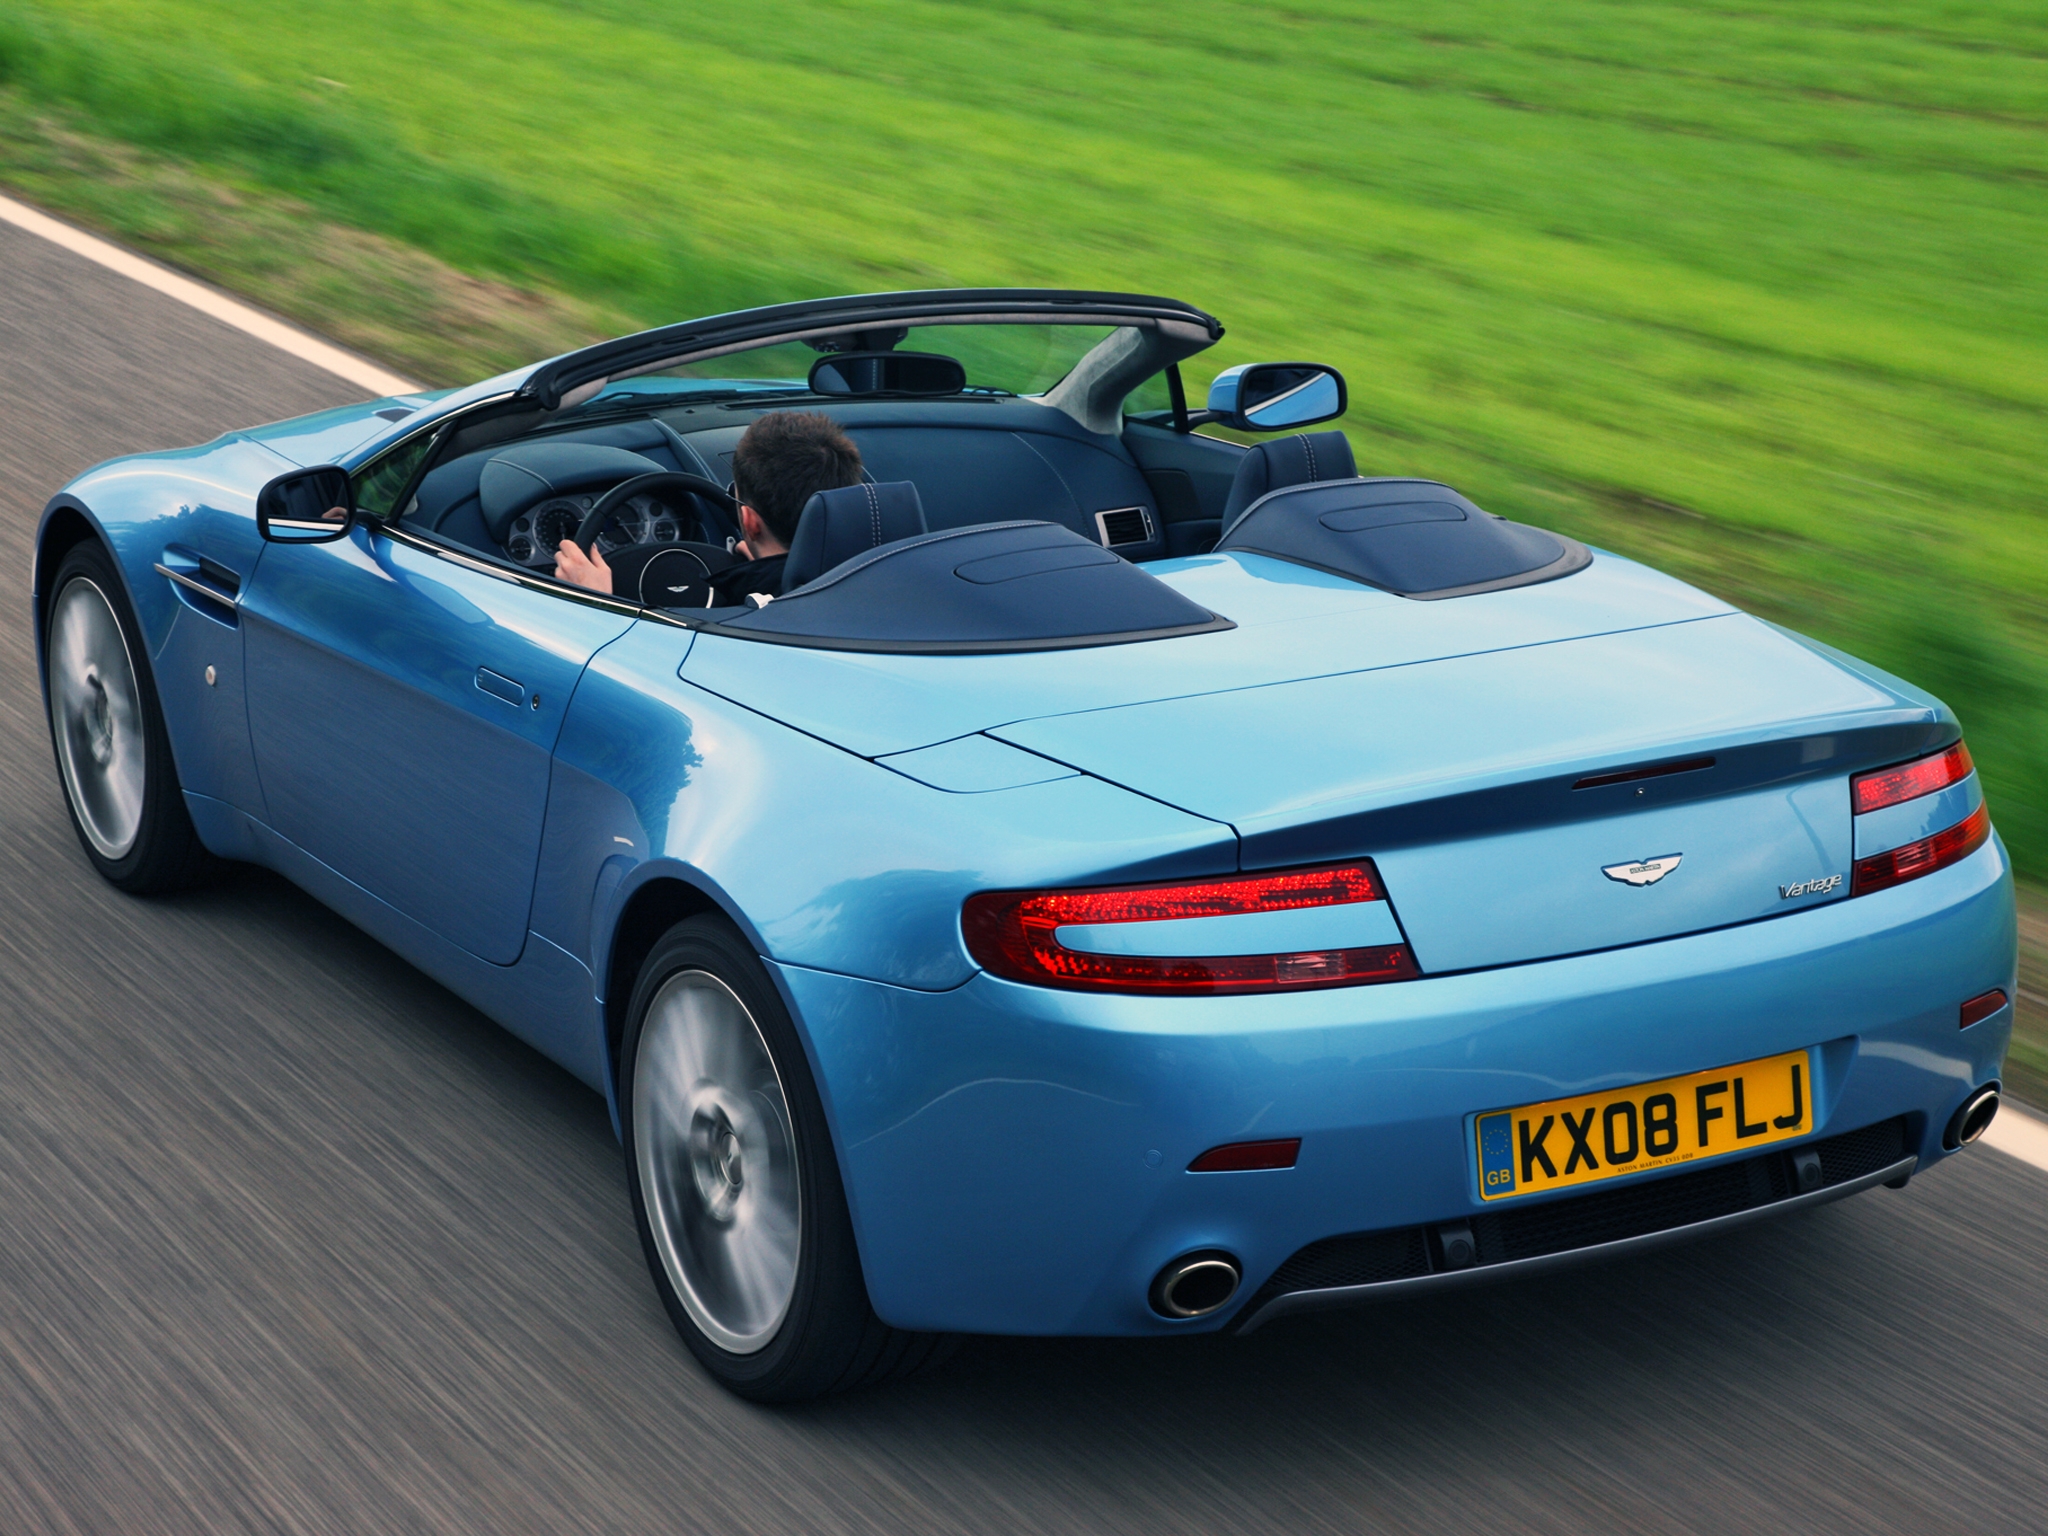 New Lock Screen Wallpapers back view, aston martin, cars, blue, rear view, speed, style, 2008, v8, vantage